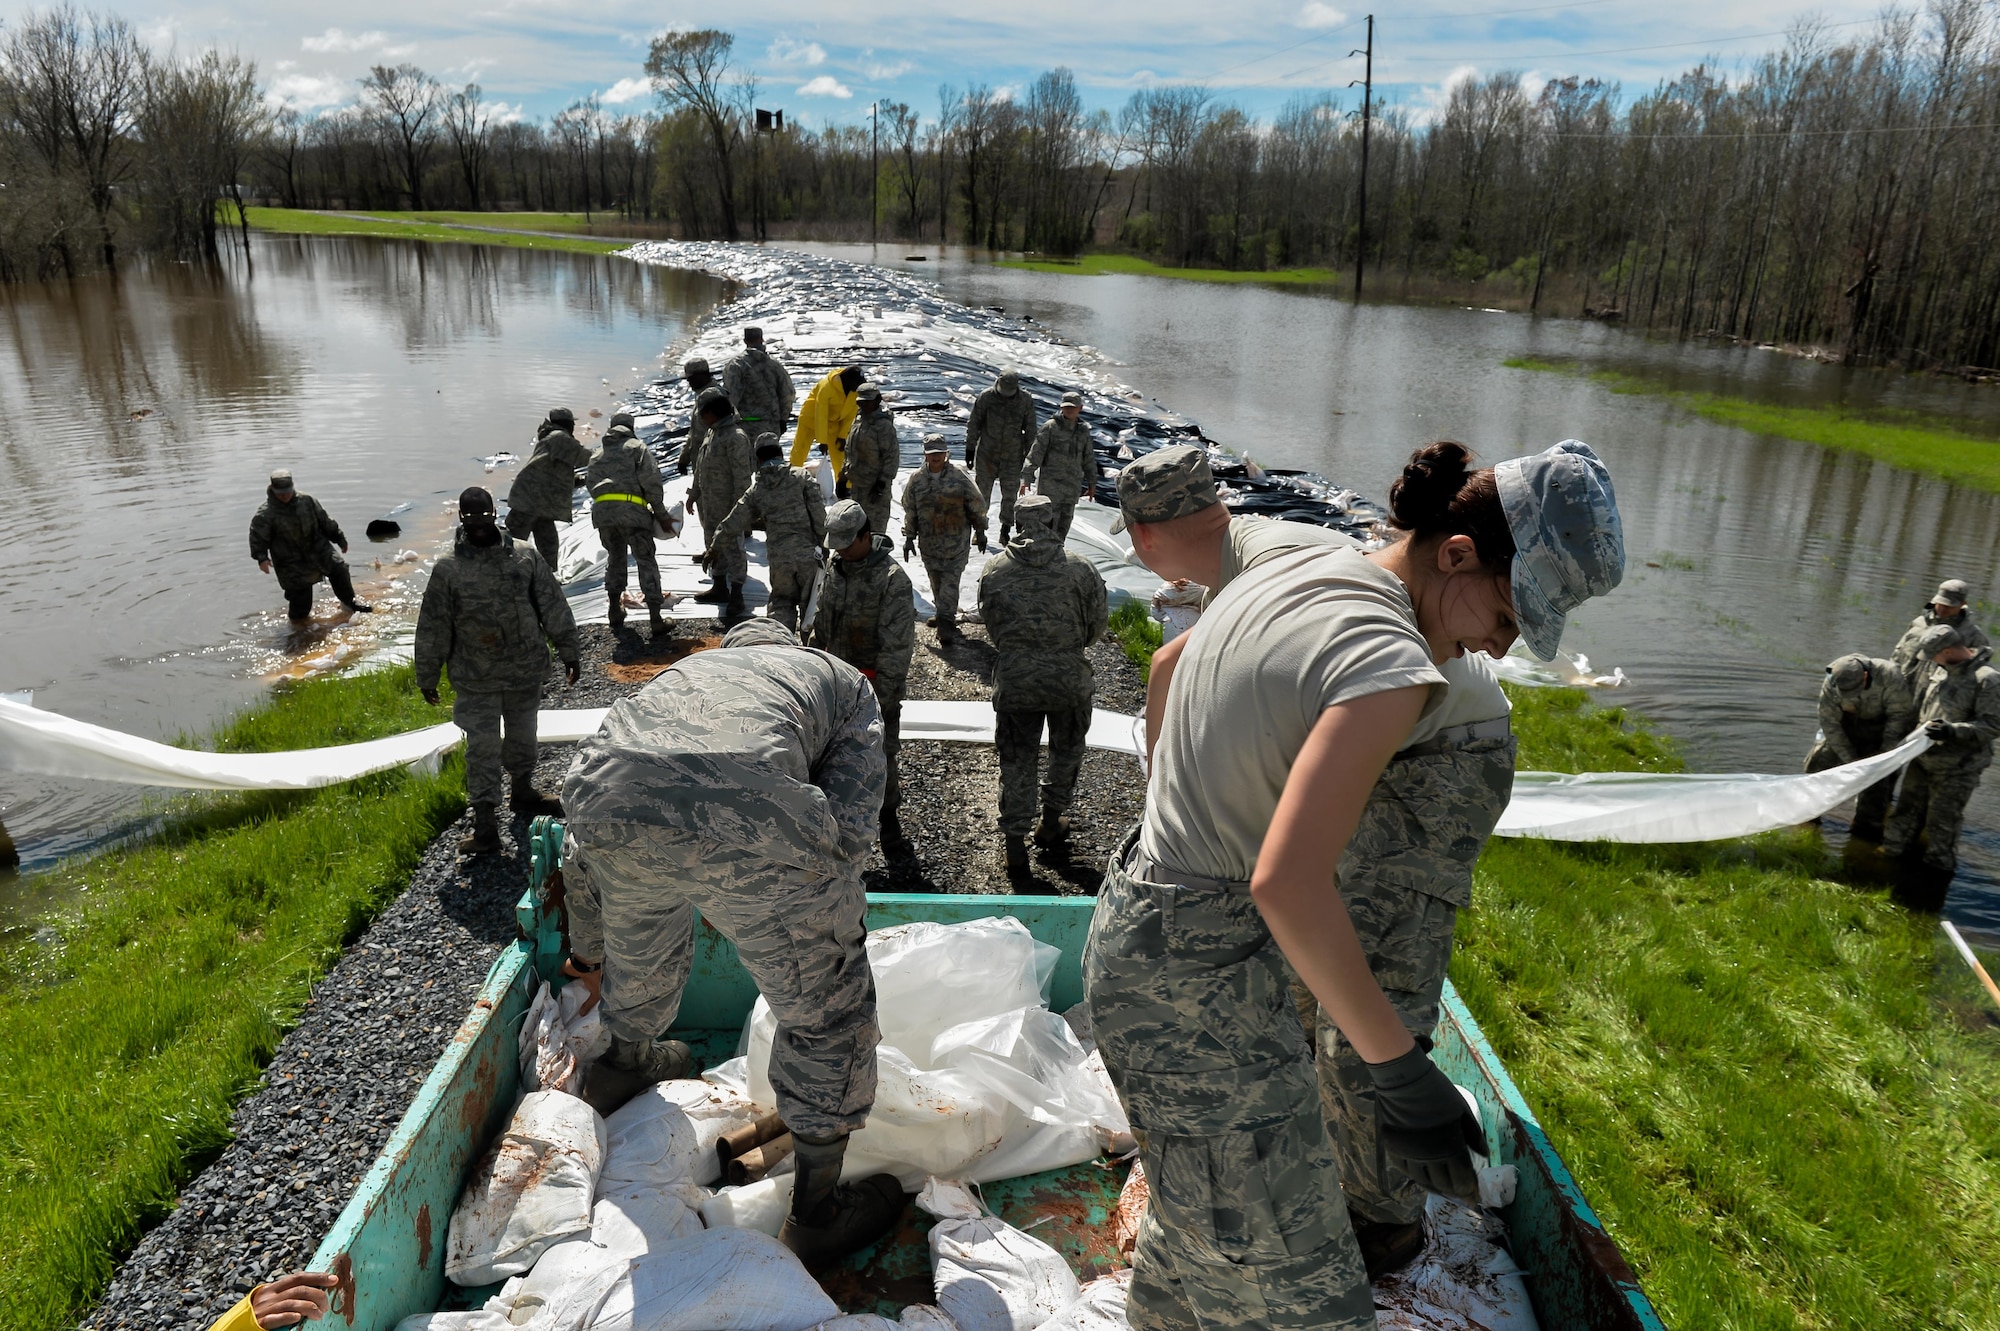 Barksdale Airmen build a protective barrier over a levee in Bossier City, La. March 10, 2016. Airmen worked in unison with the Army Corps of Engineers and local city employees to transport, unload and place sandbags at the lowest sections of the Red Chute Bayou levee. (U.S. Air Force photo/Senior Airman Mozer O. Da Cunha)